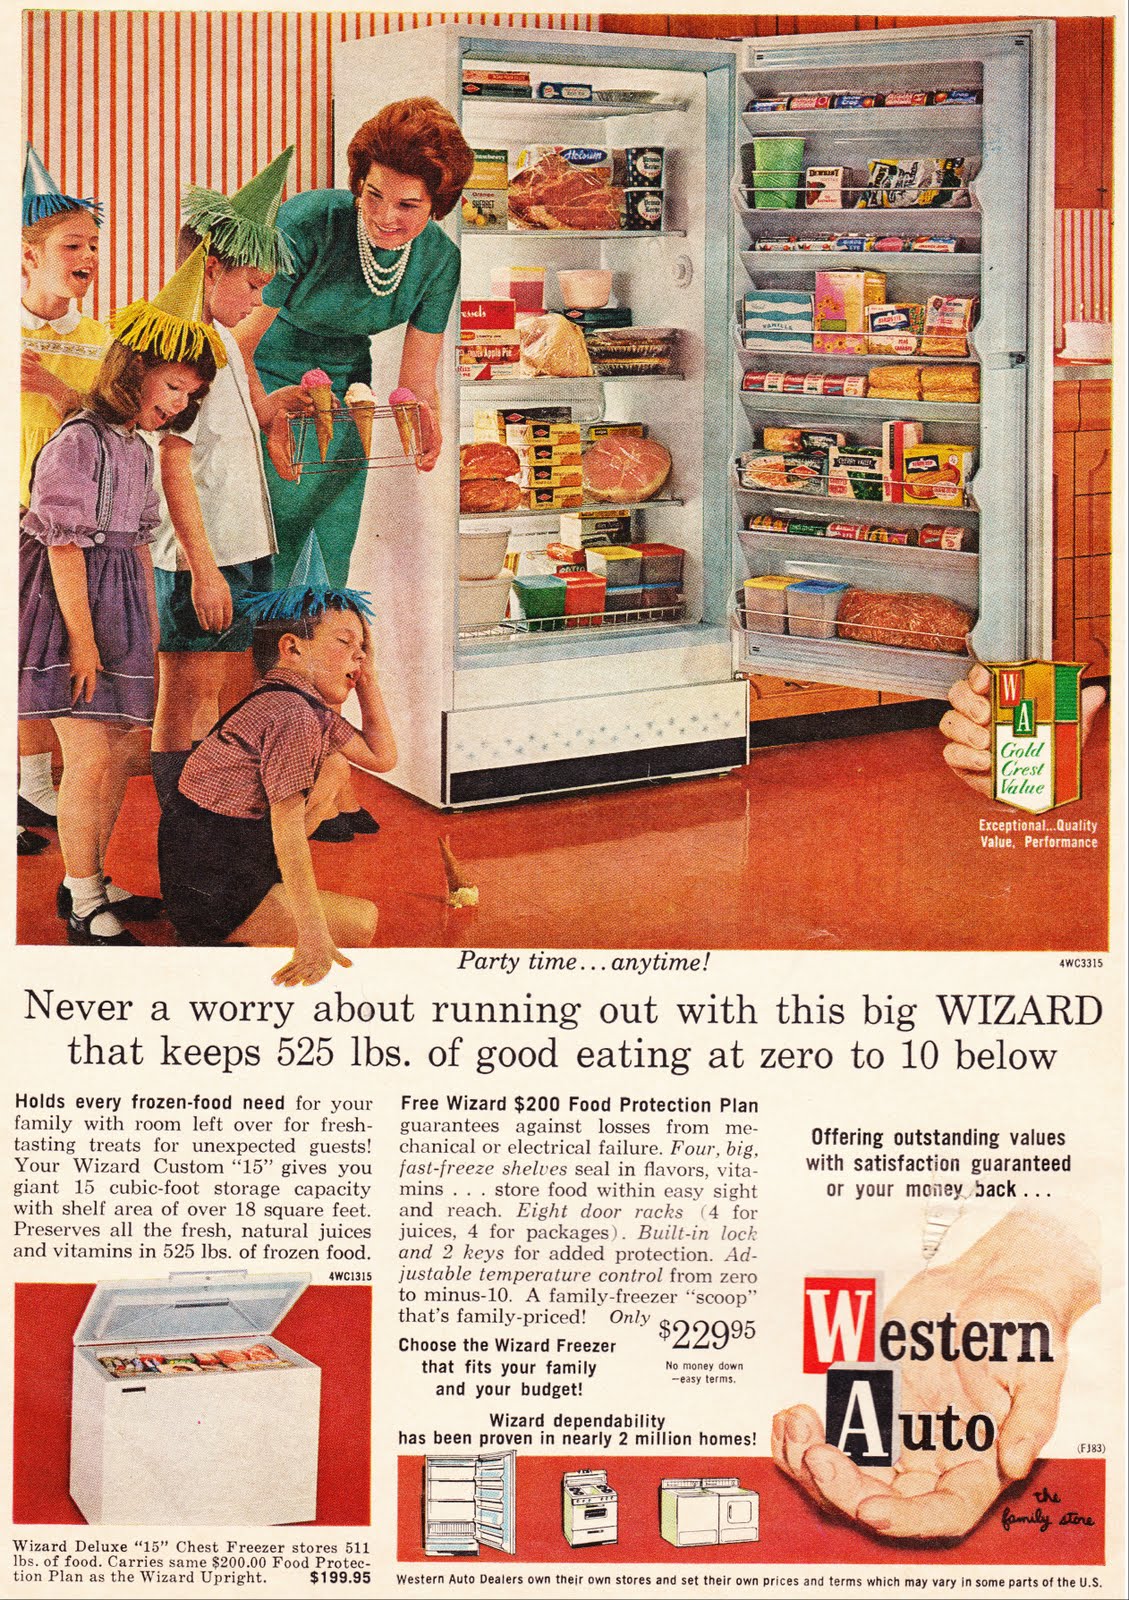 an advertit with people looking inside a refrigerator